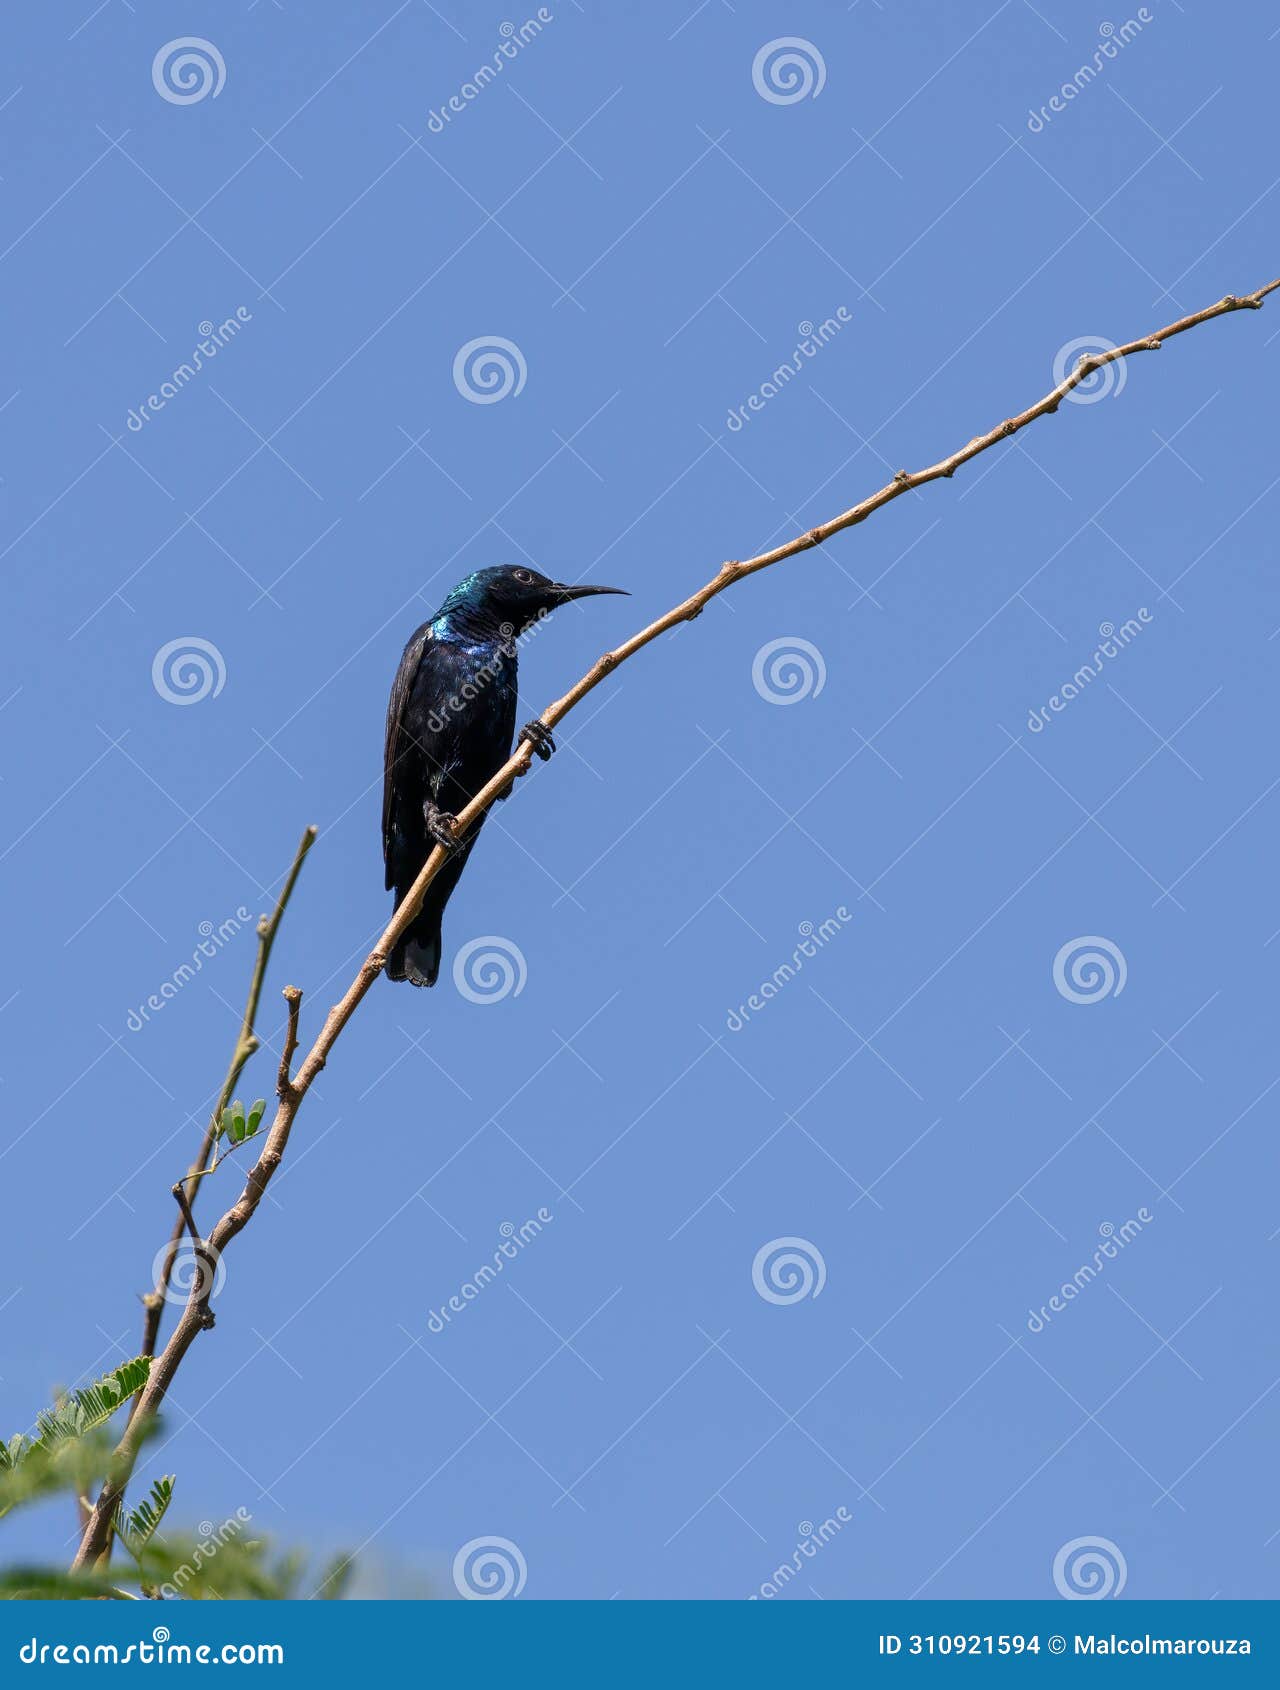 purple sunbird perched on a thin branch of a plant